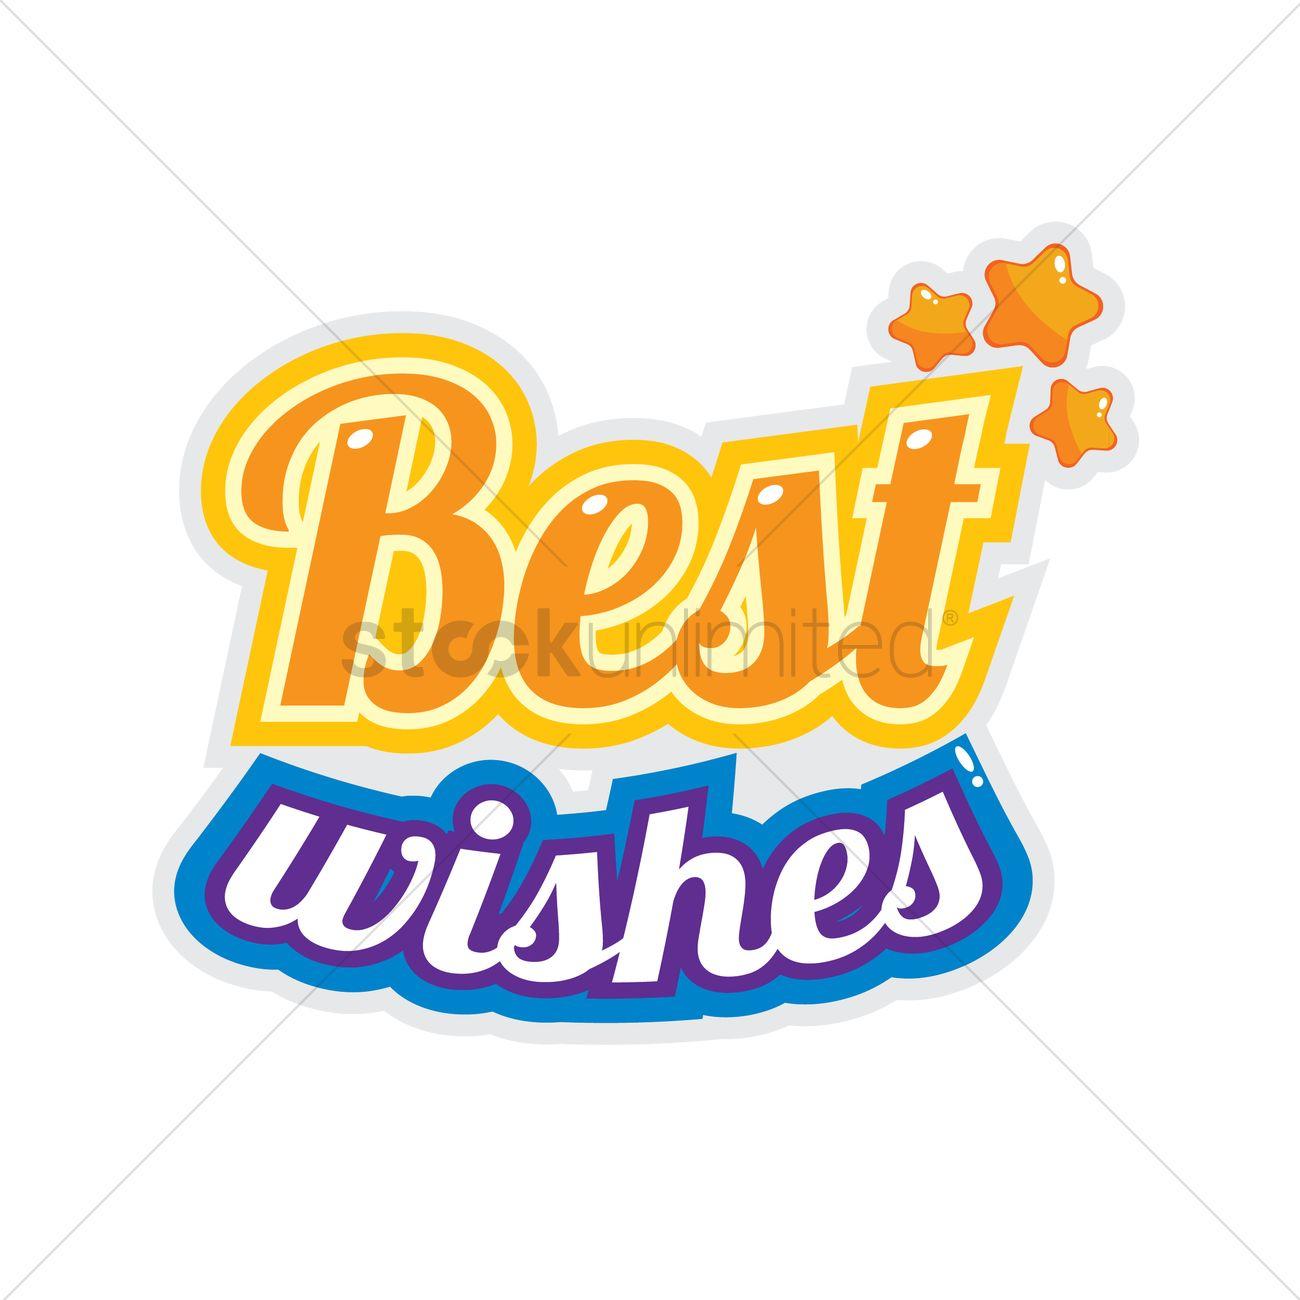 Best Wishes Logo - Best wishes label Vector Image - 1707708 | StockUnlimited